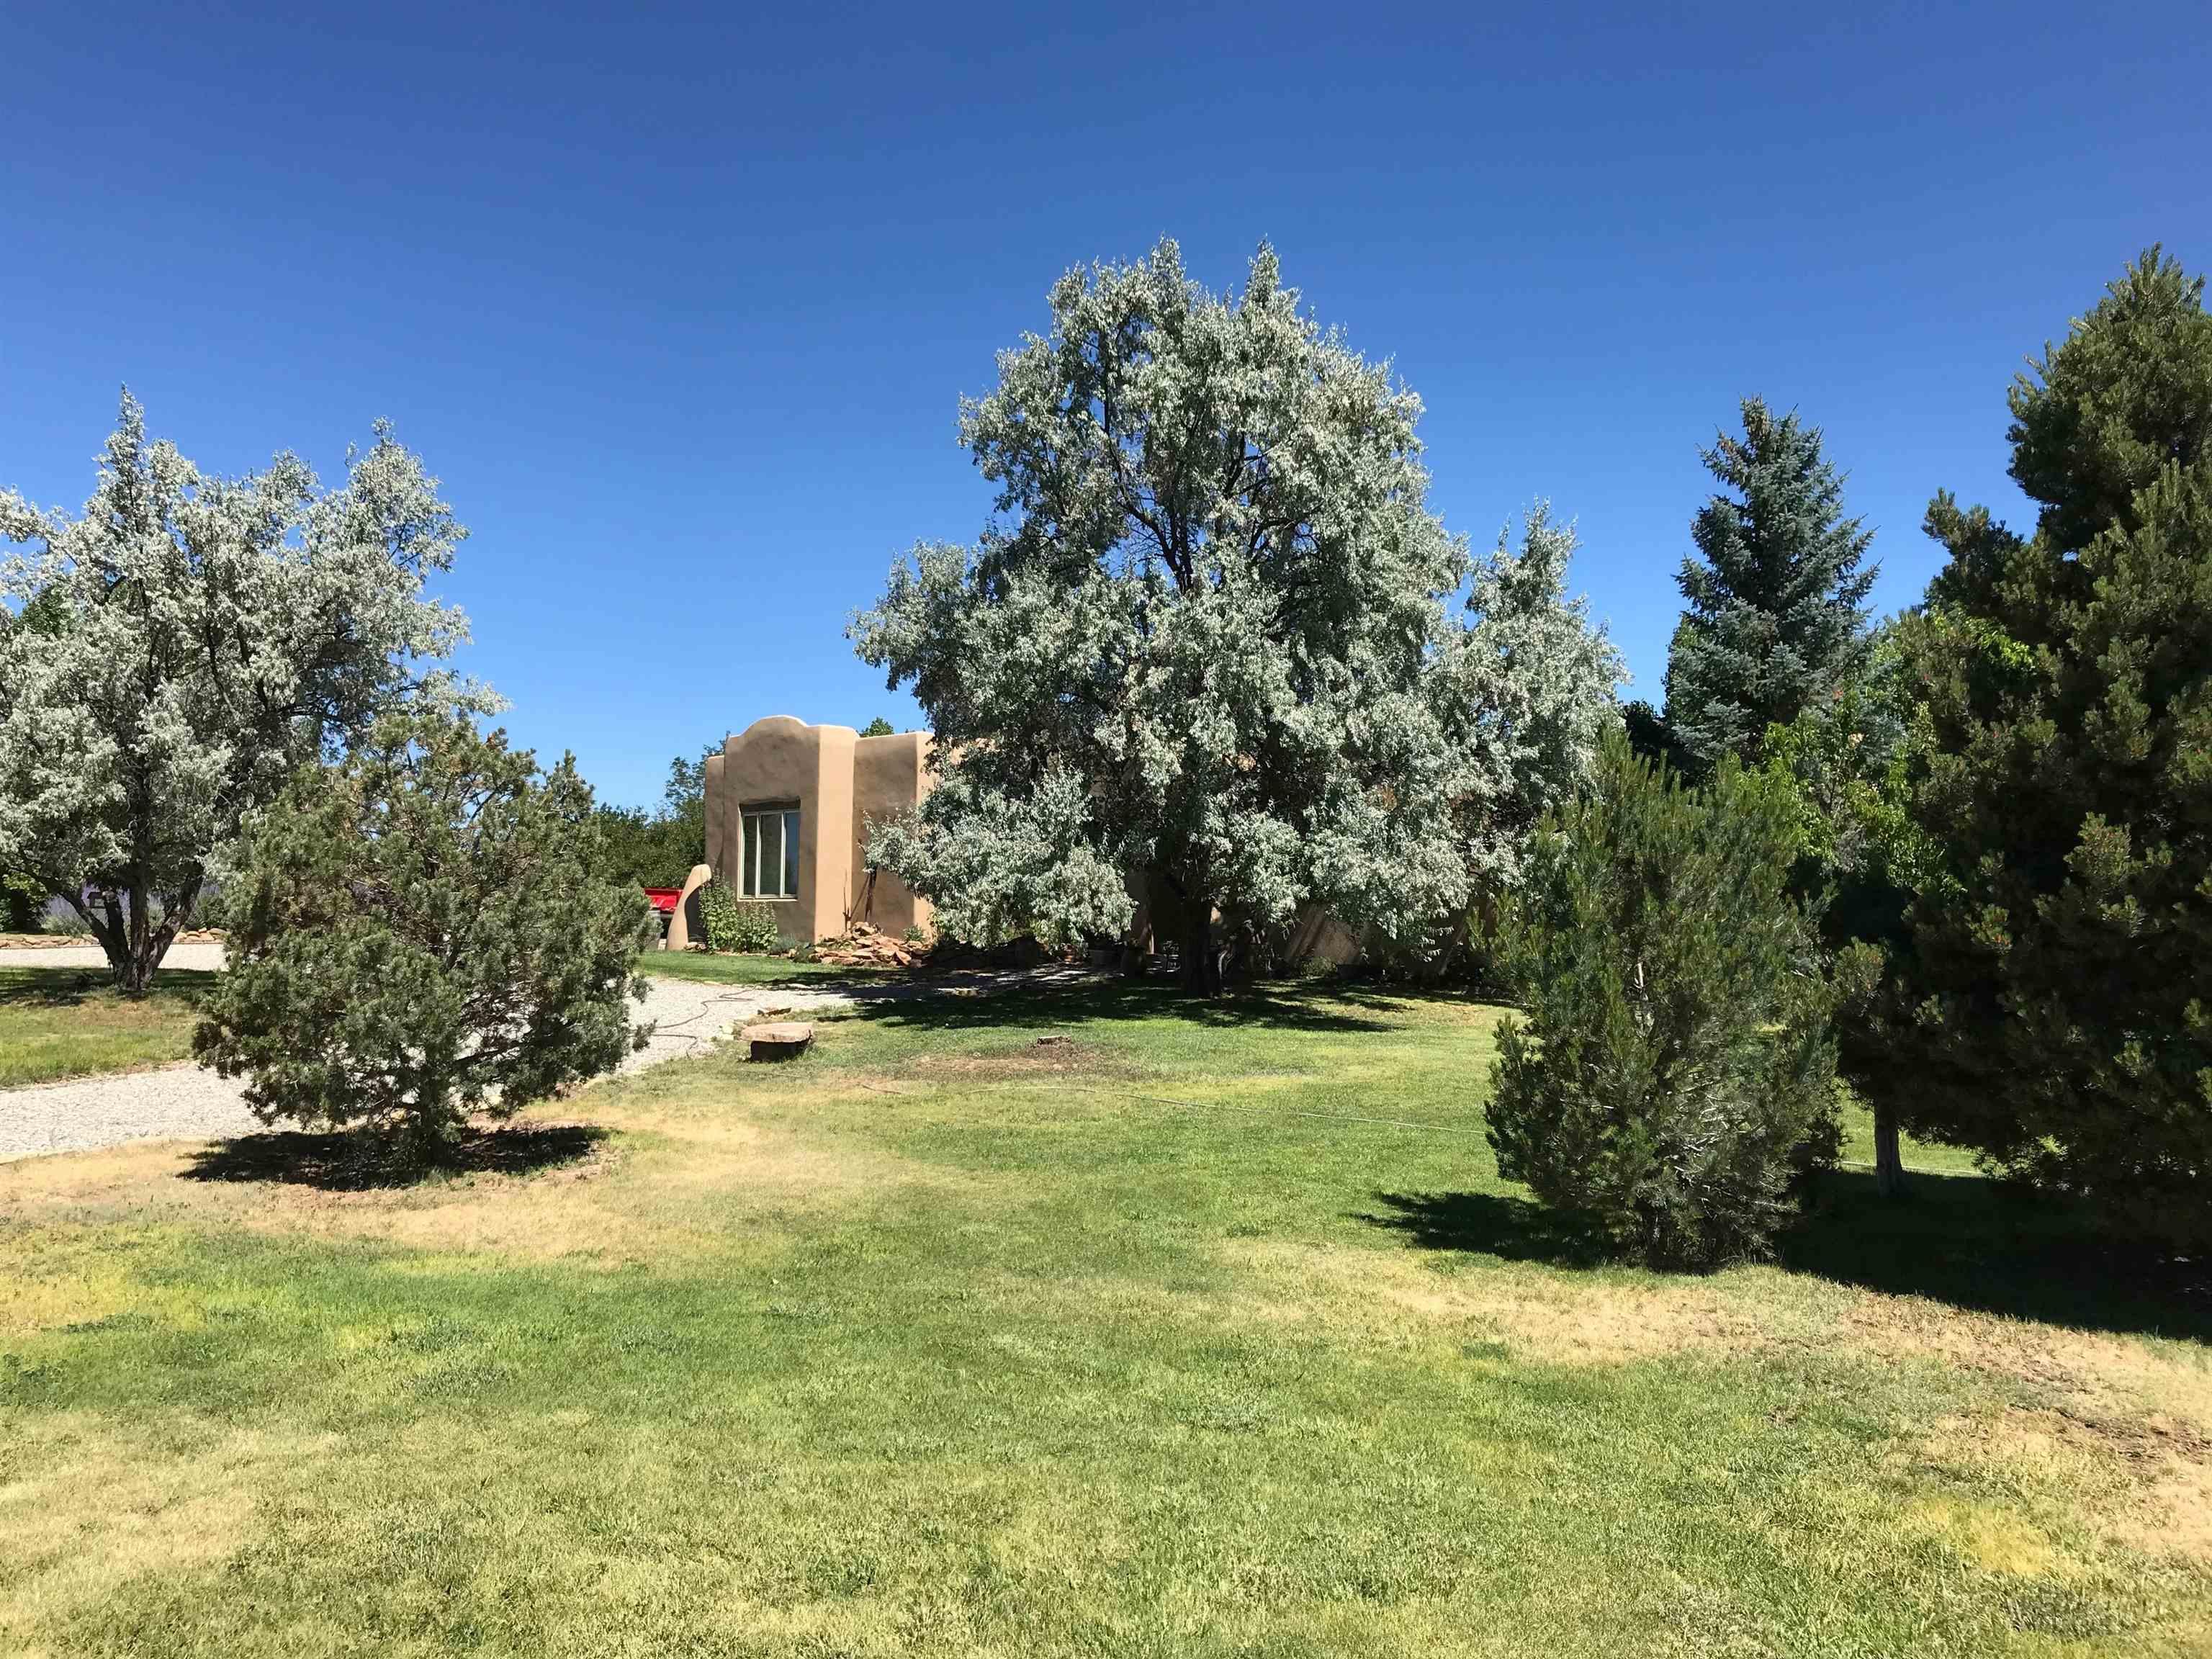 19 North Mesa Road, Taos, New Mexico, 87529, United States, 4 Bedrooms Bedrooms, ,3 BathroomsBathrooms,Residential,For Sale,19 north mesa RD,1412731